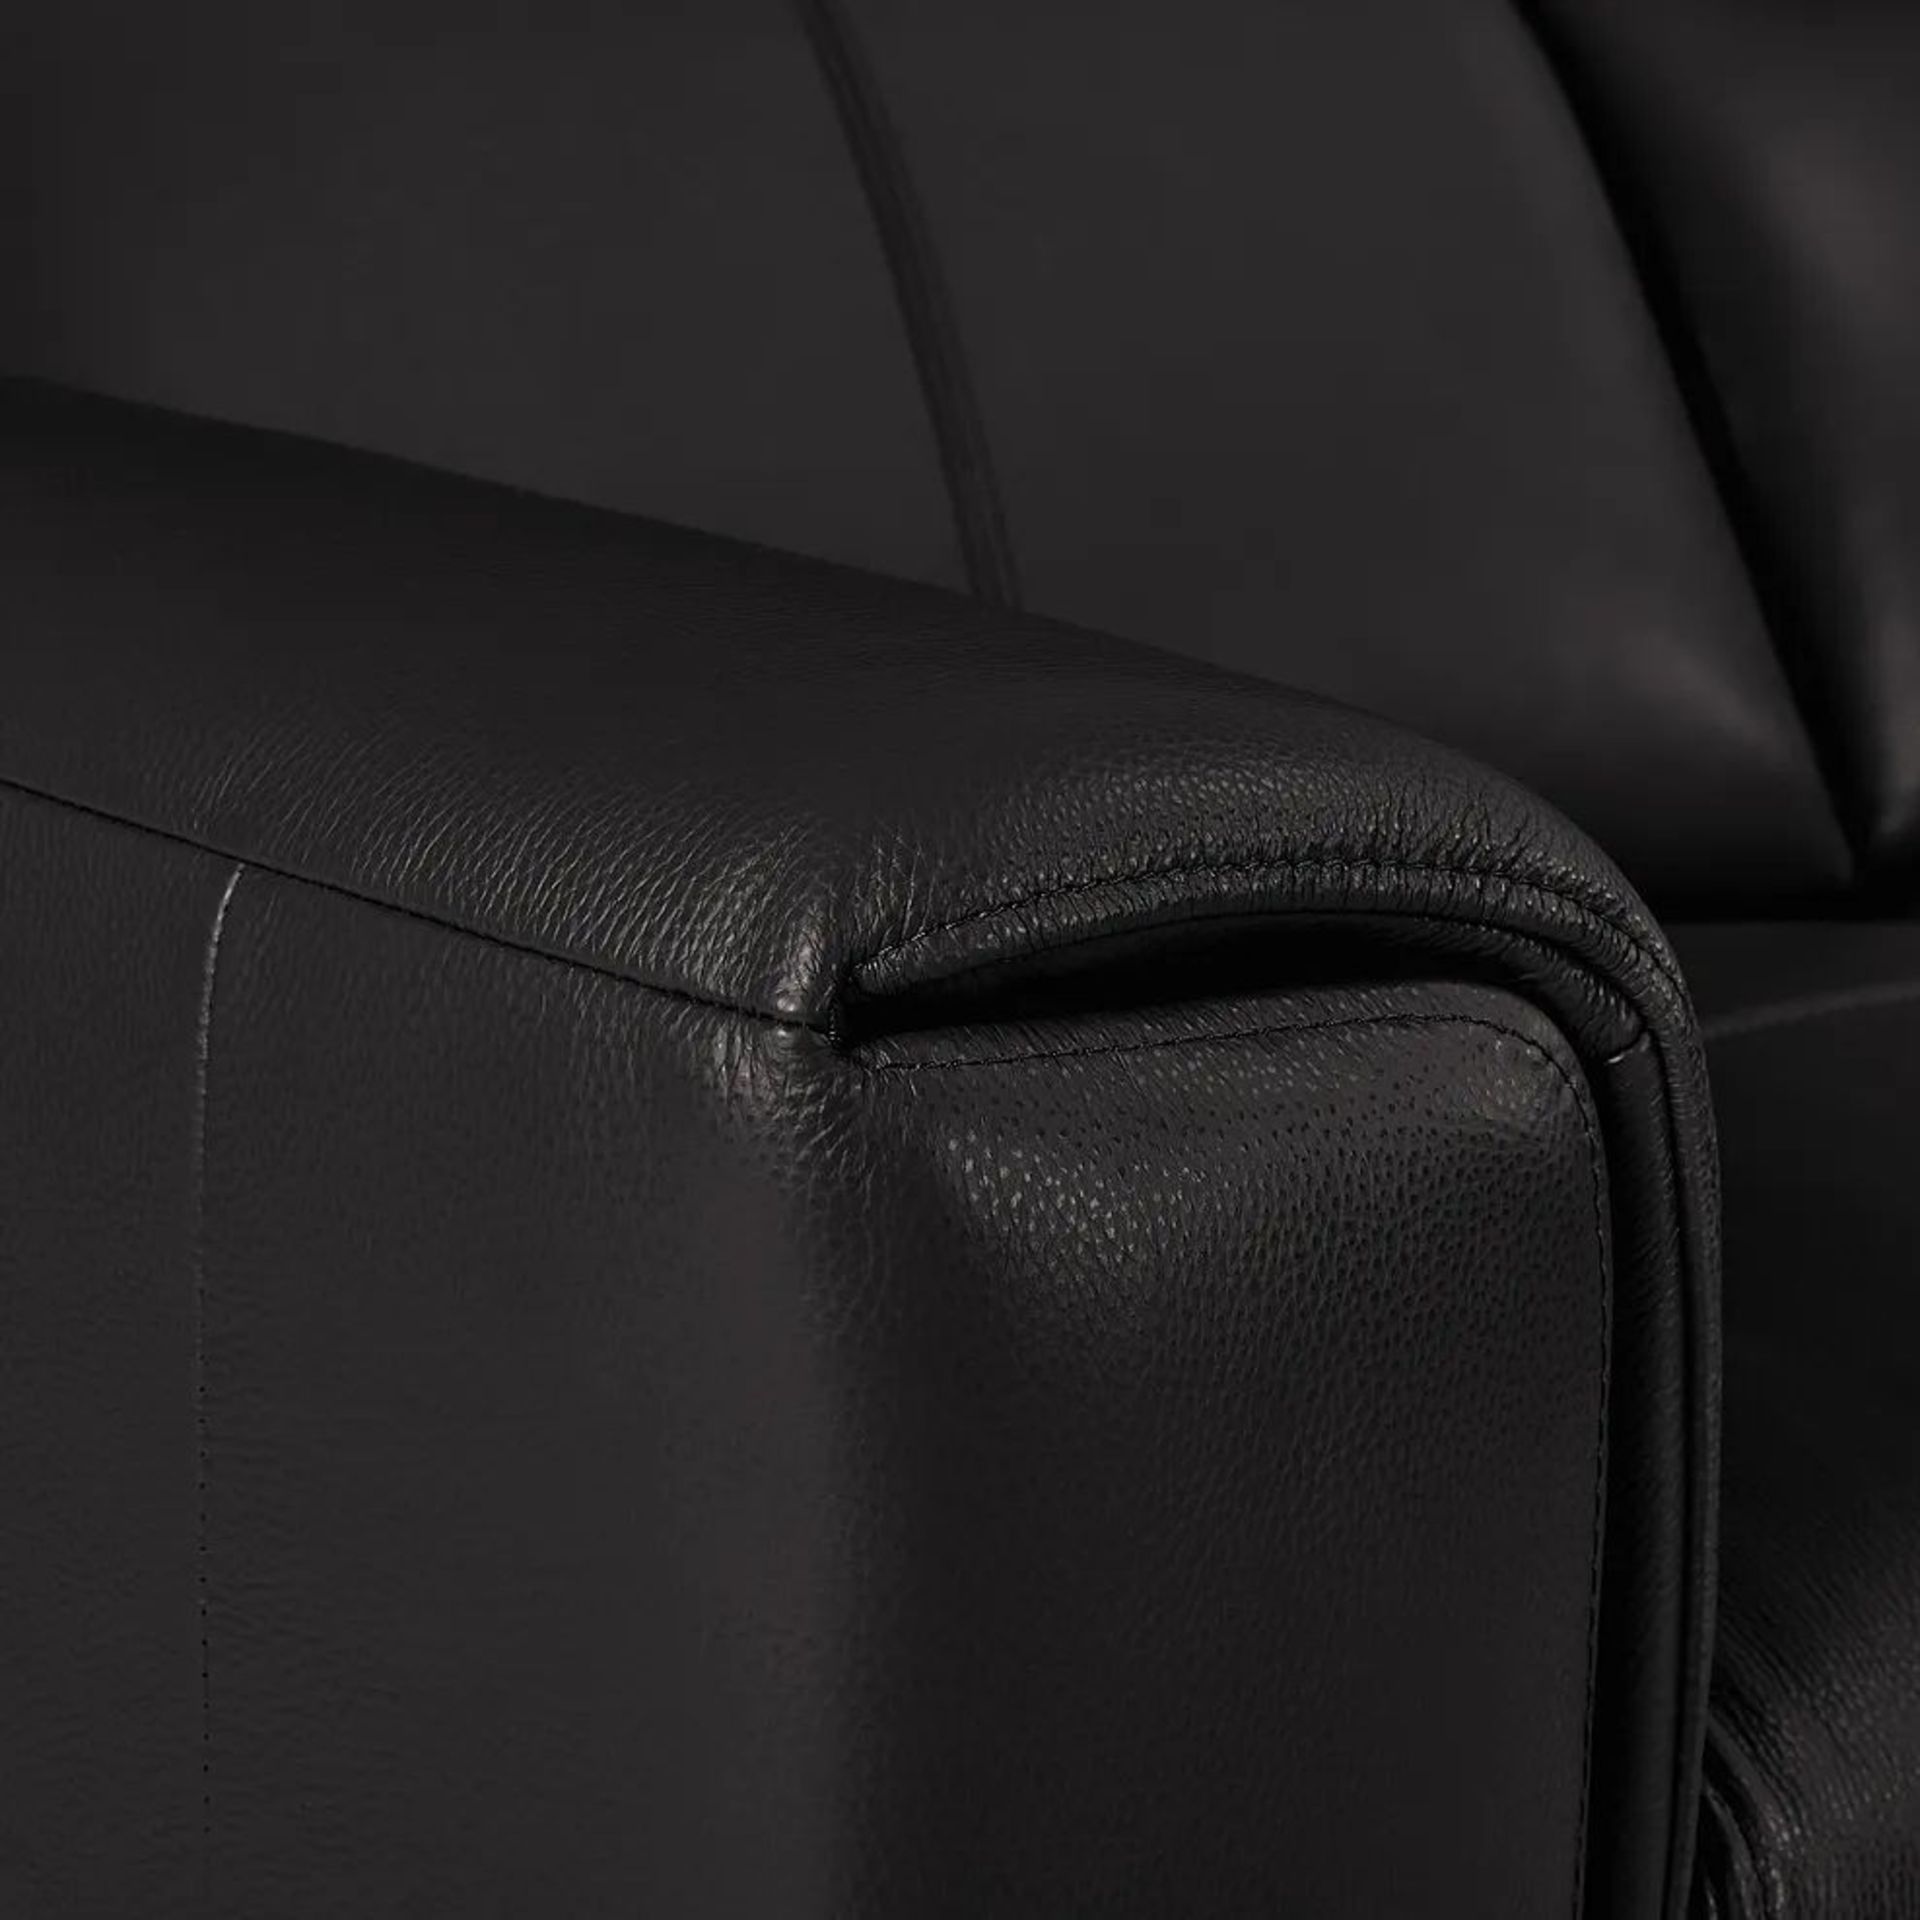 BRAND NEW SAMSON 3 Seater Electric Recliner Sofa - BLACK LEATHER. RRP £1779. Showcasing neat, modern - Image 8 of 8